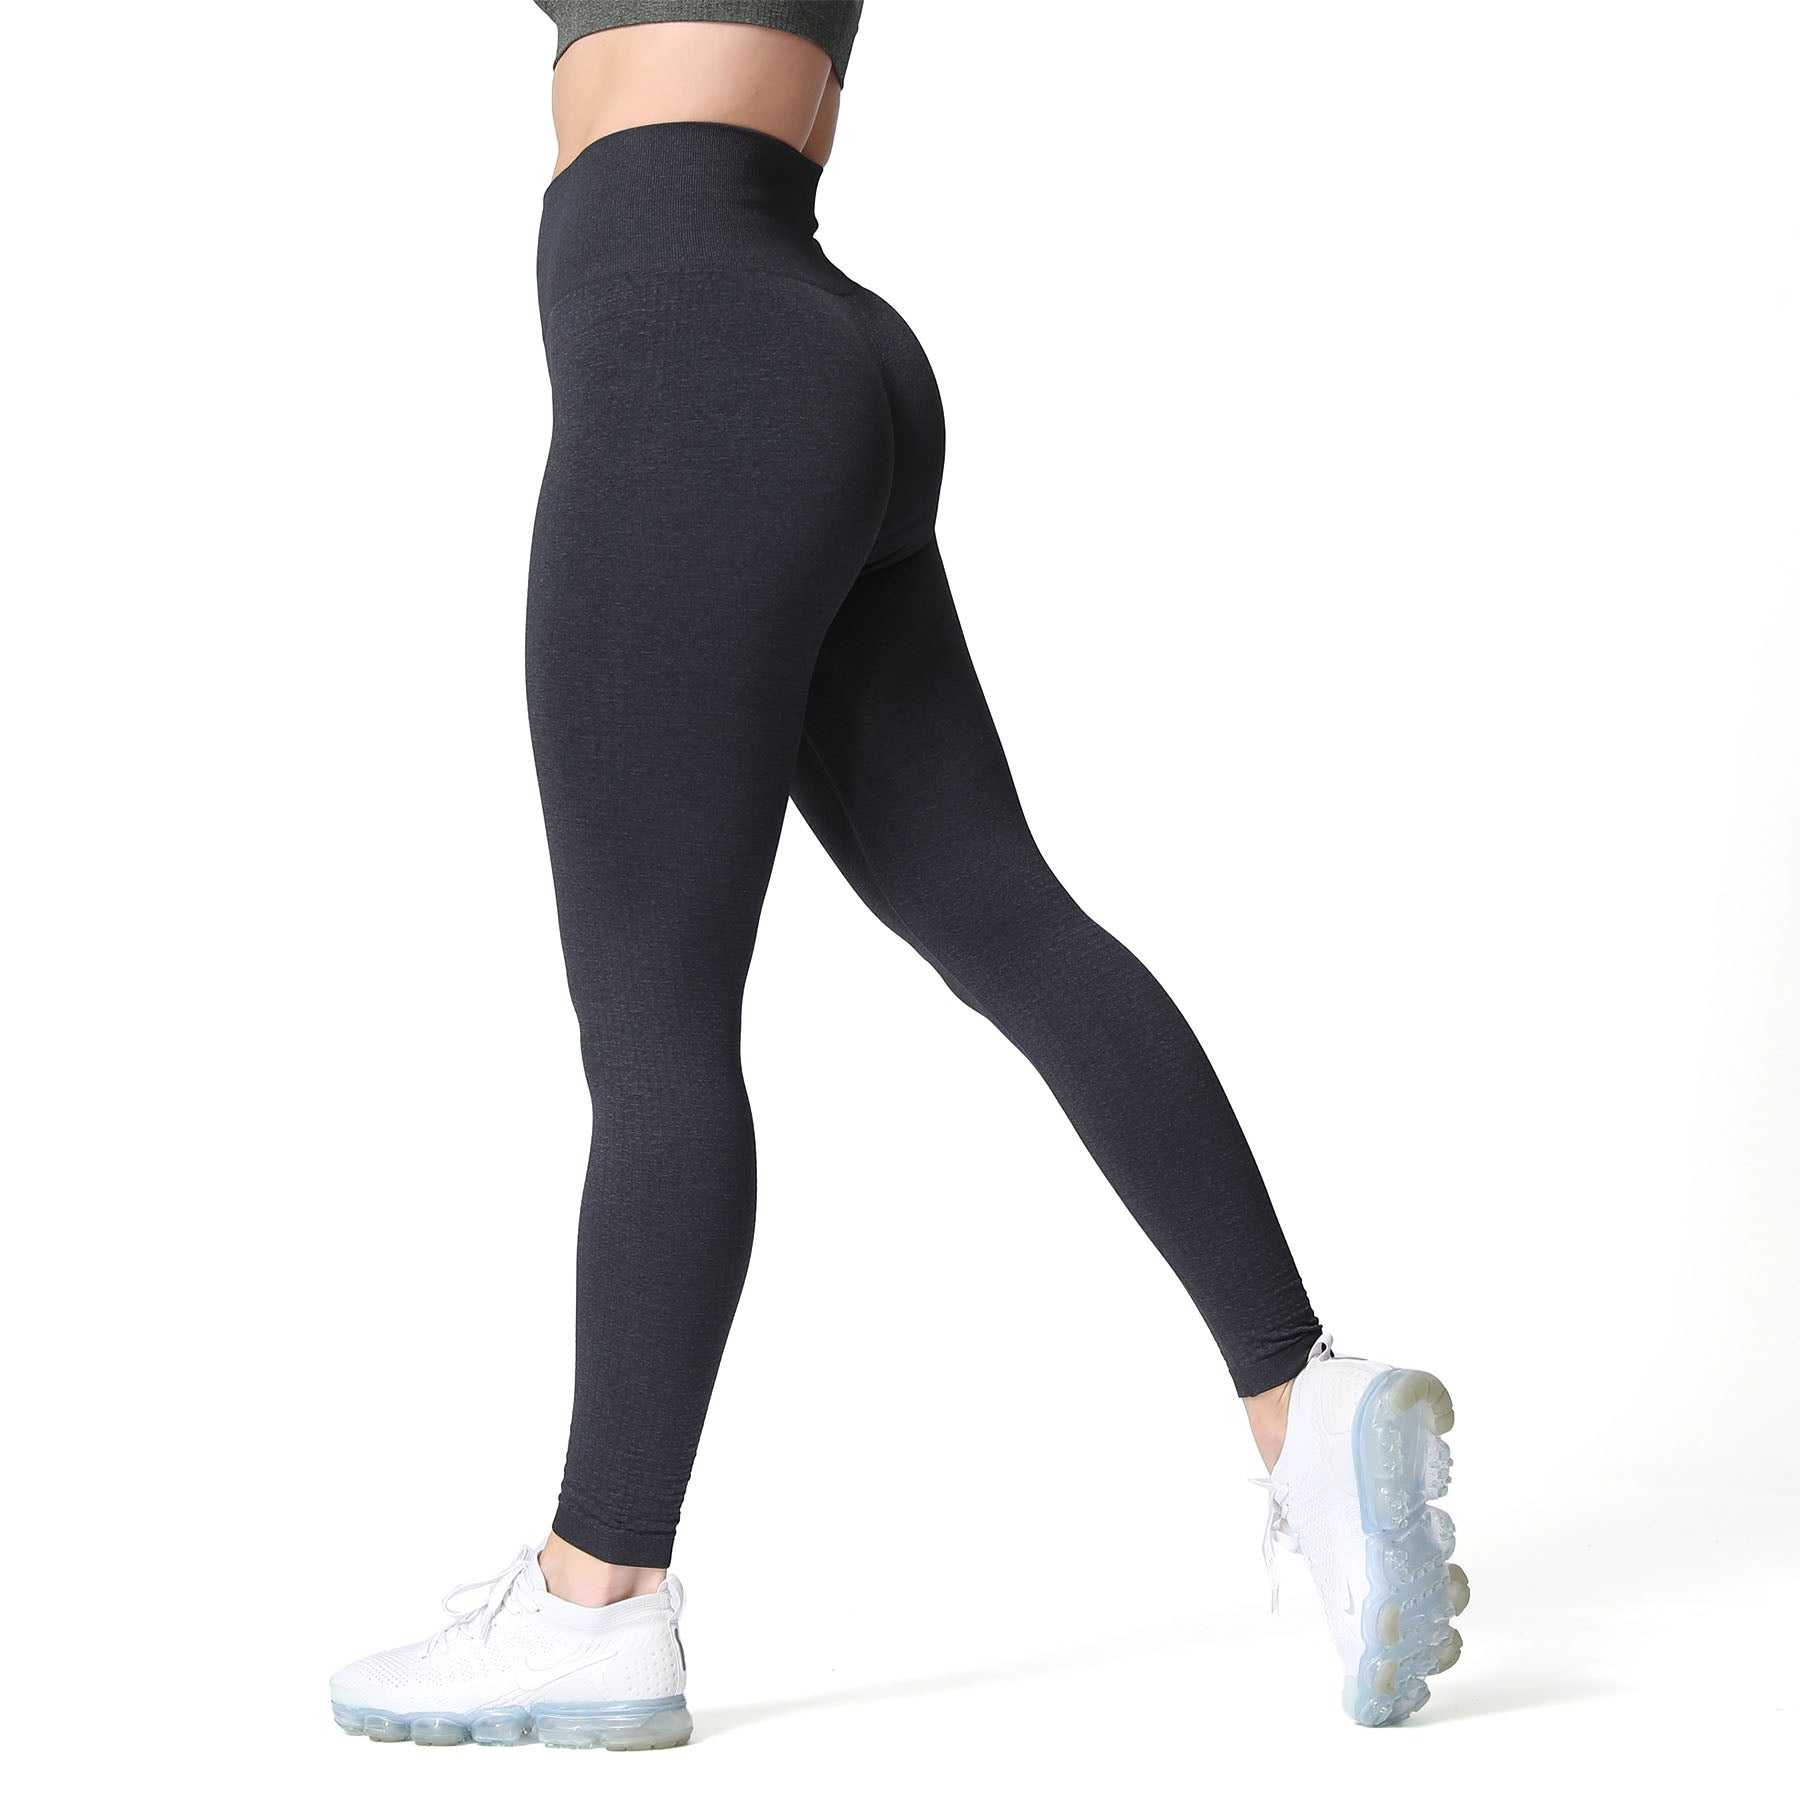 Aoxjox Yoga Pants for Women Workout High Waisted Gym Sport Adapt